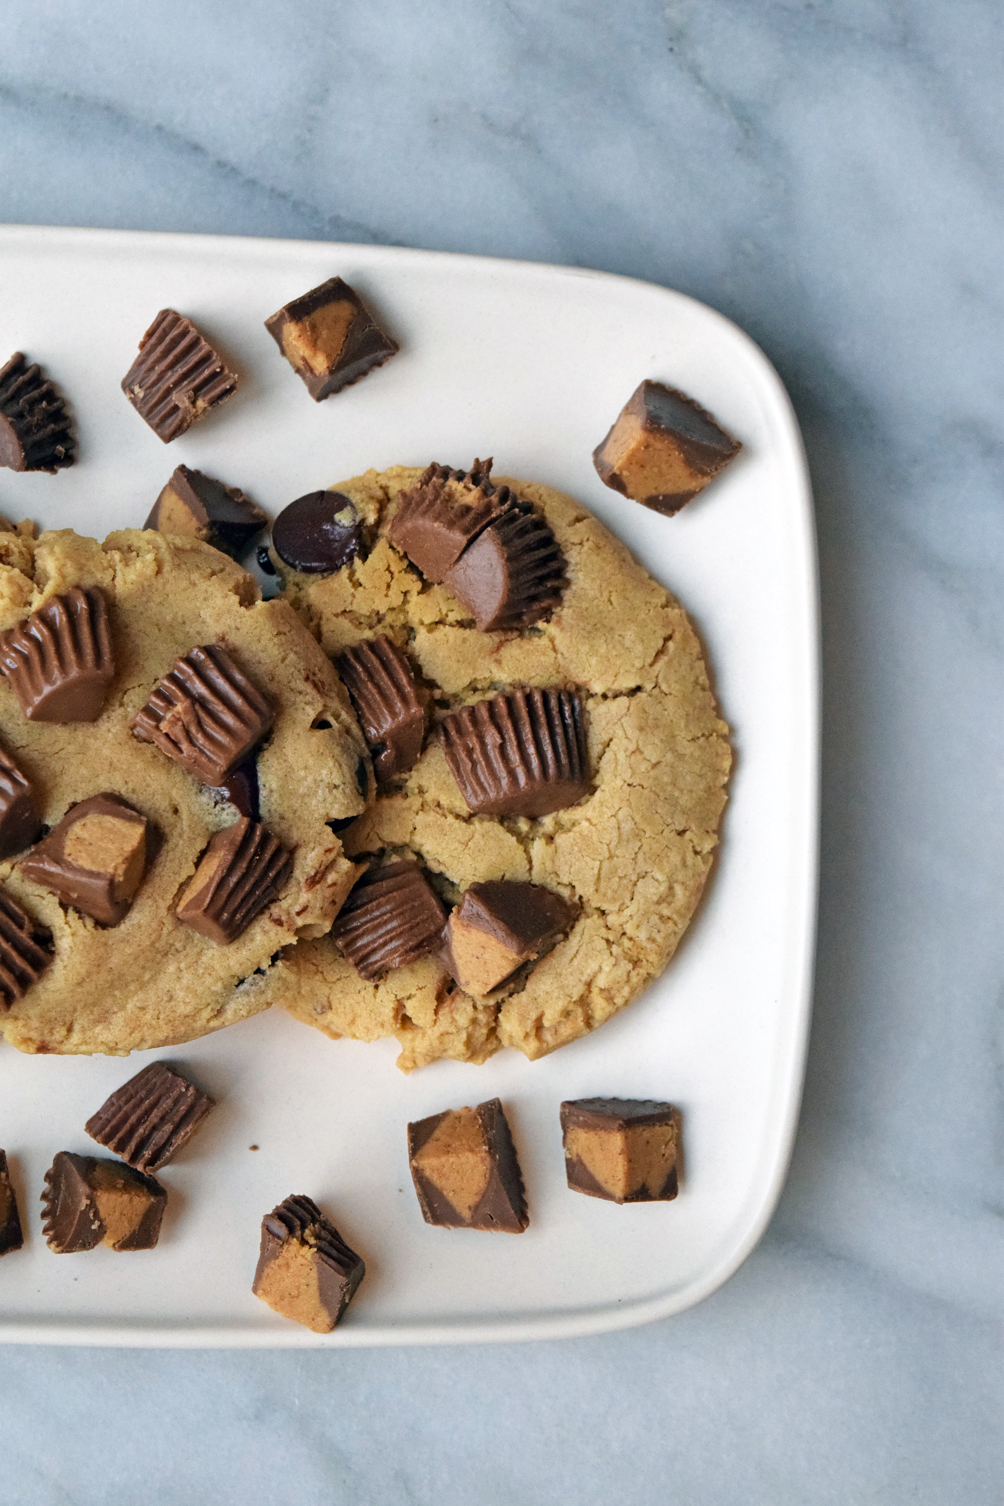 Reese's peanut butter cookies